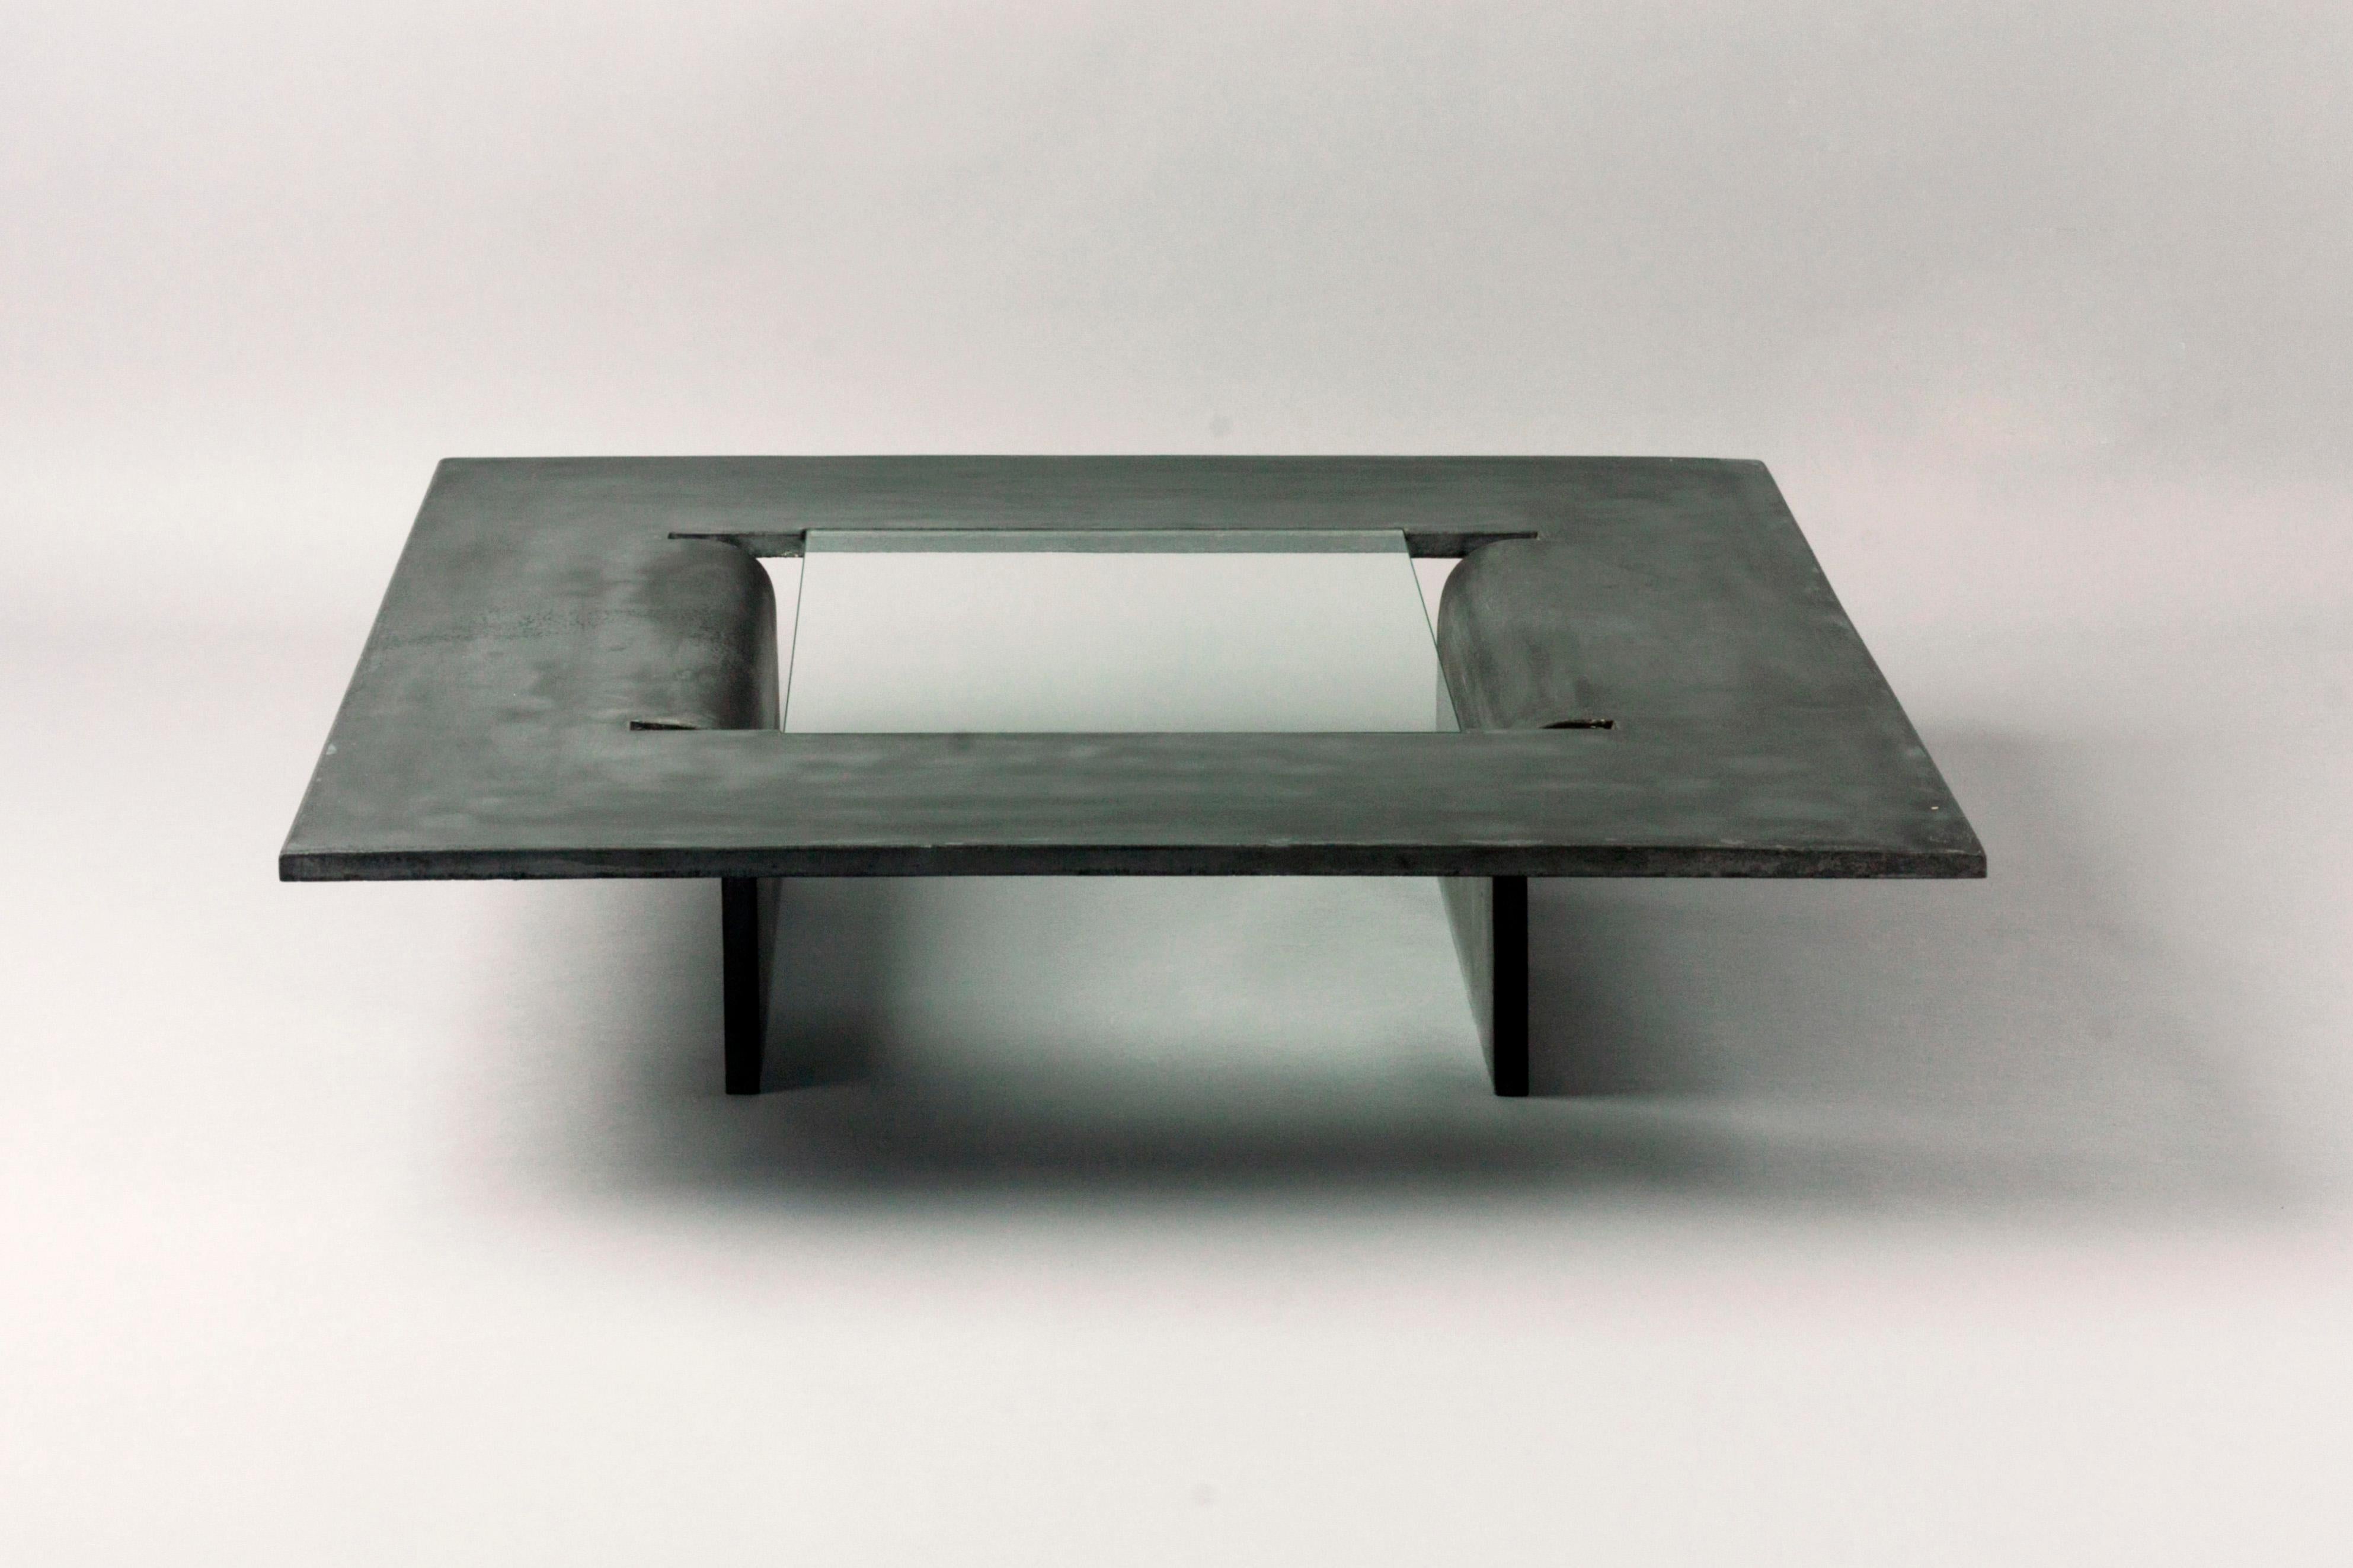 Made to Order, this coffee table is made of Fiber-Glass Reinforced Concrete. Inspired by the liquidity of the concrete material itself, the center is cut out and softly bent to create the table’s legs, and the gap is covered with glass to complete